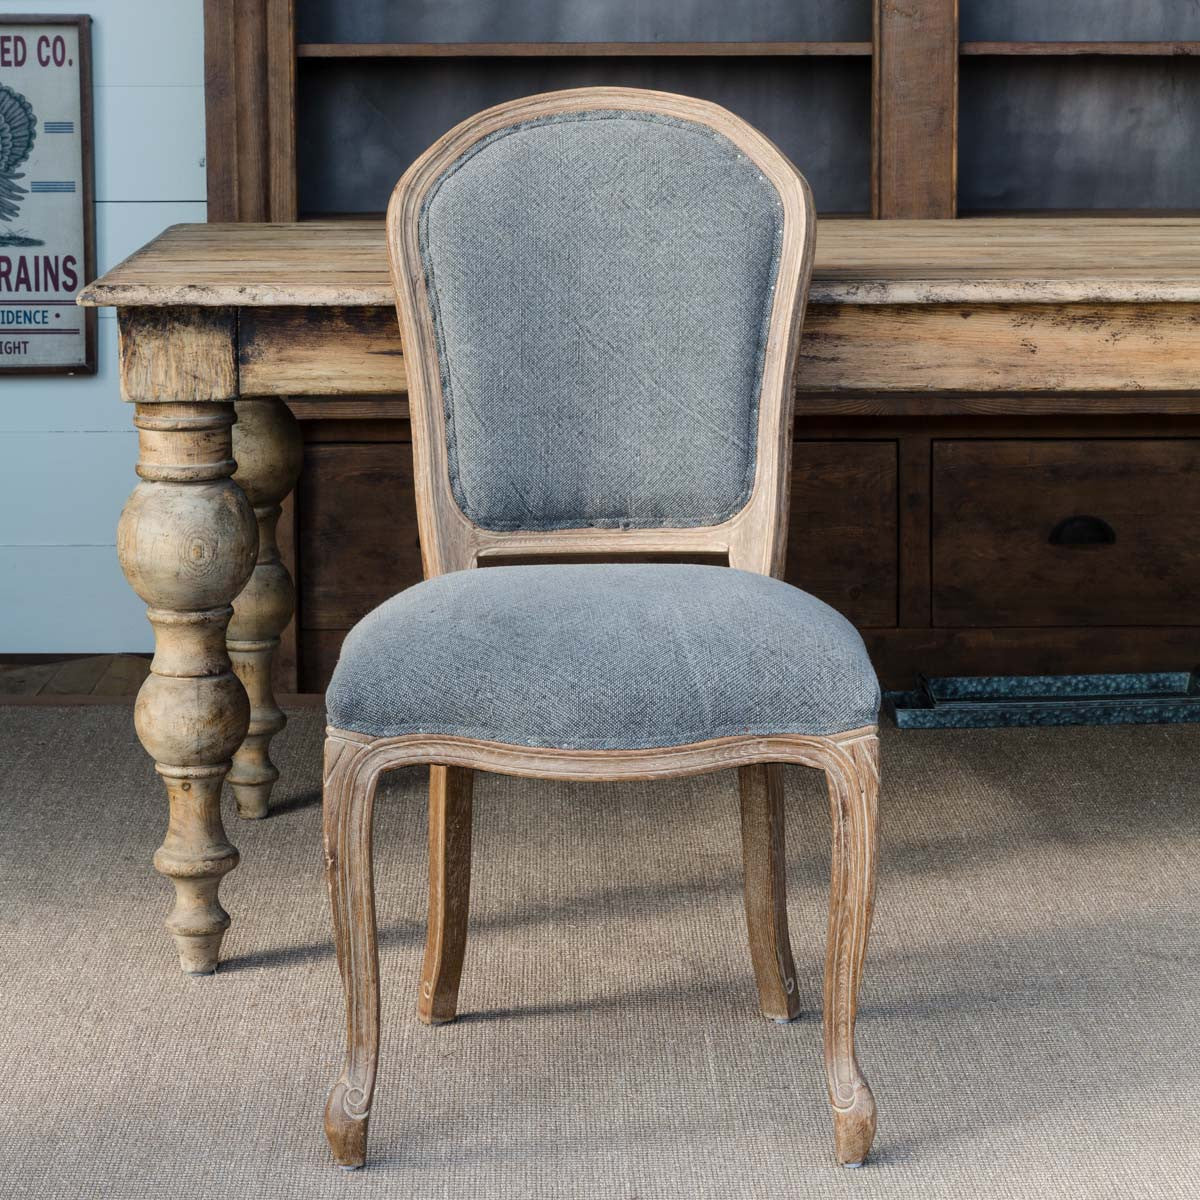 King Louis Chair Rattan Back - Collected & Co. : Collected & Co.